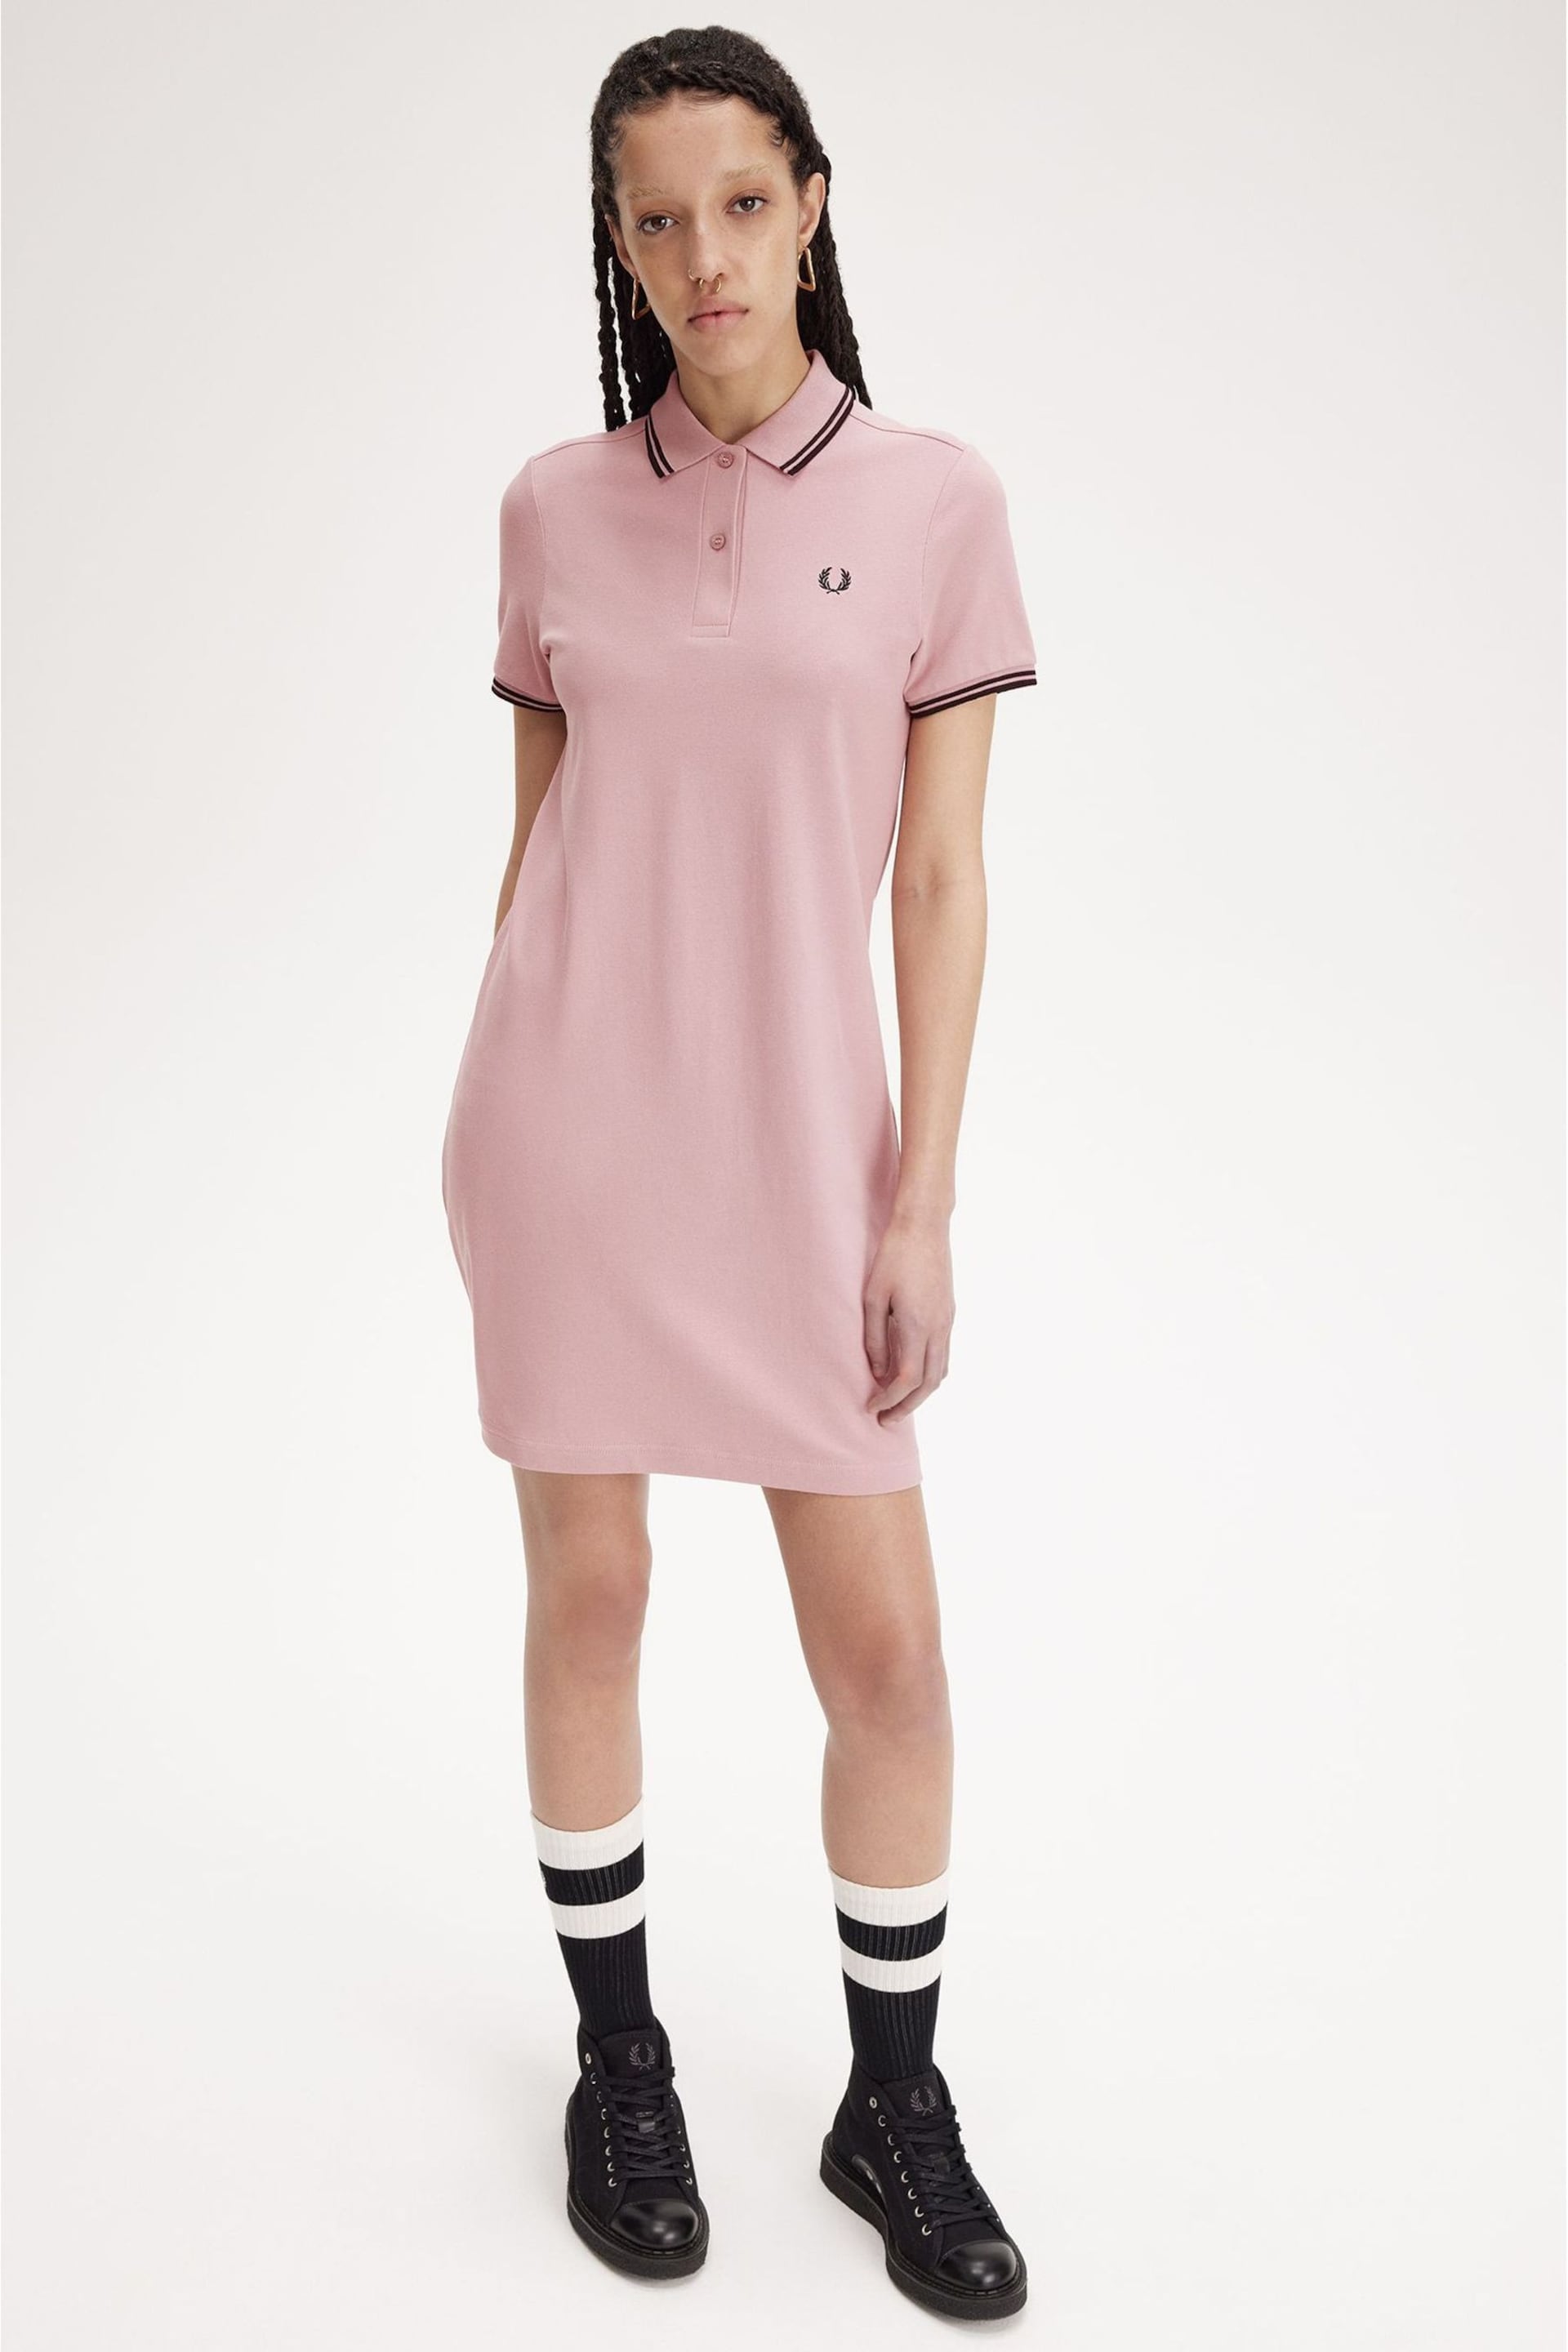 Fred Perry Twin Tipped Polo Dress - Image 3 of 6